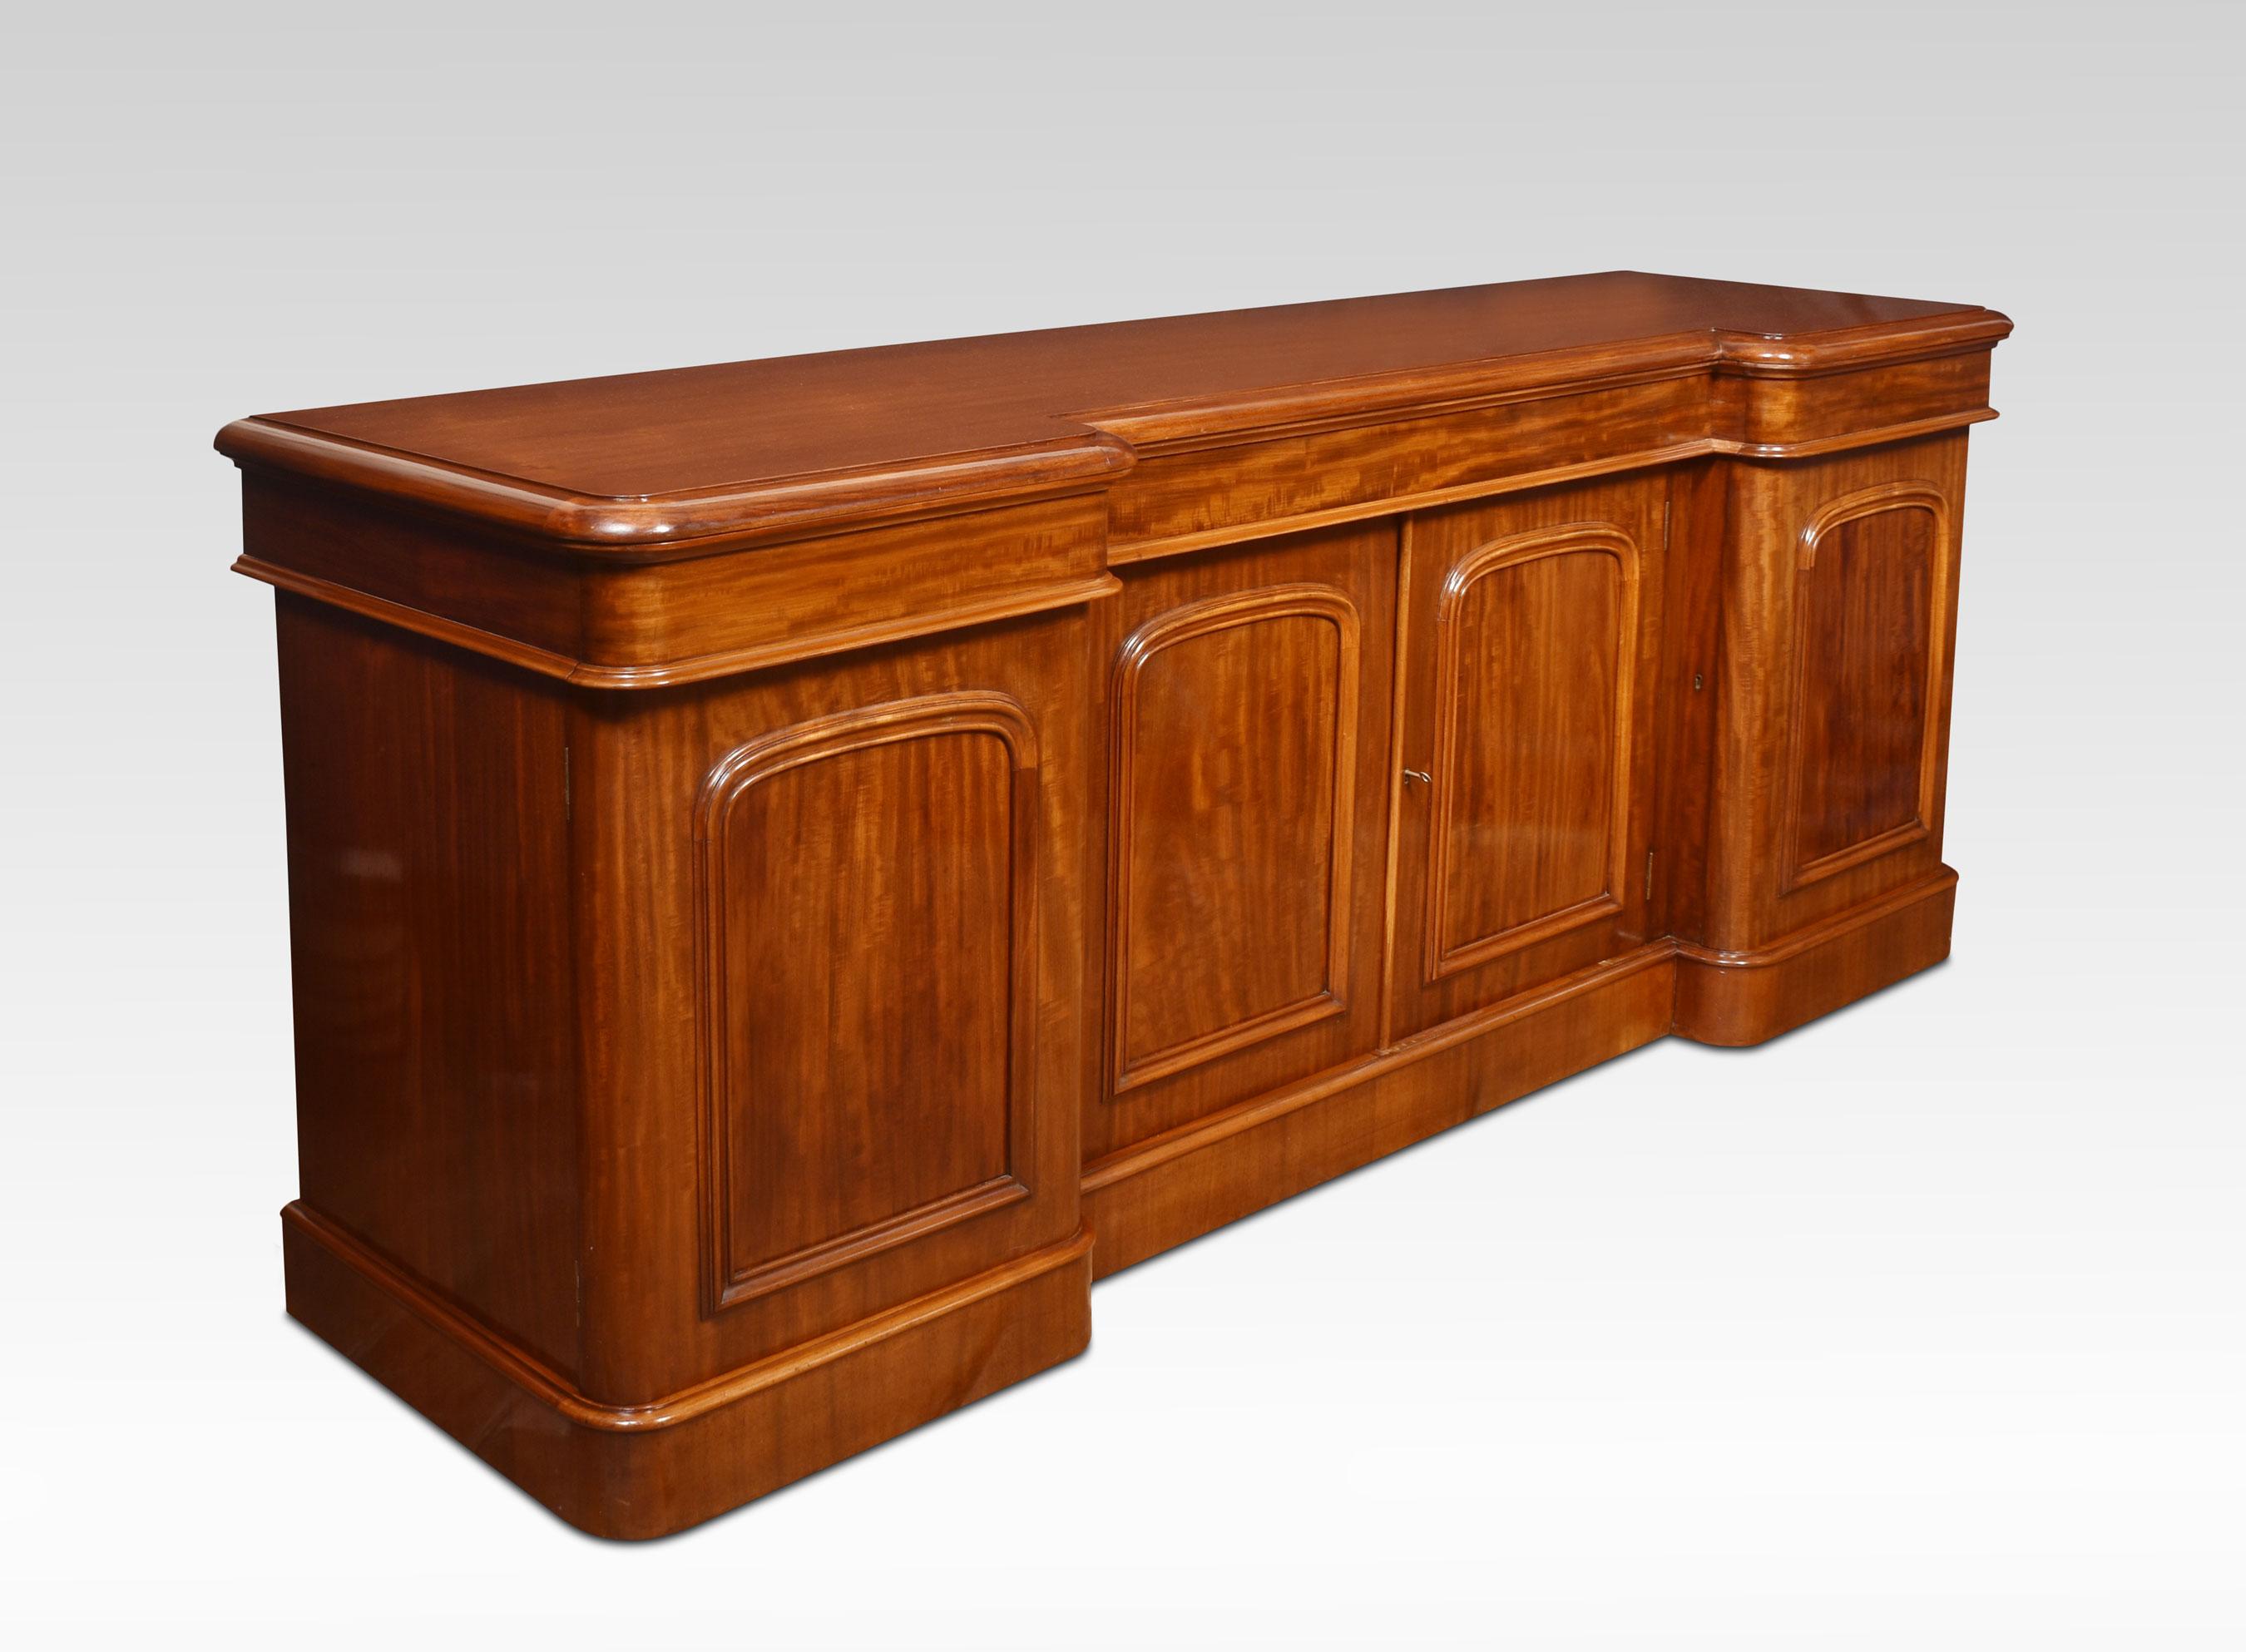 Mahogany Four Door Sideboard In Good Condition For Sale In Cheshire, GB